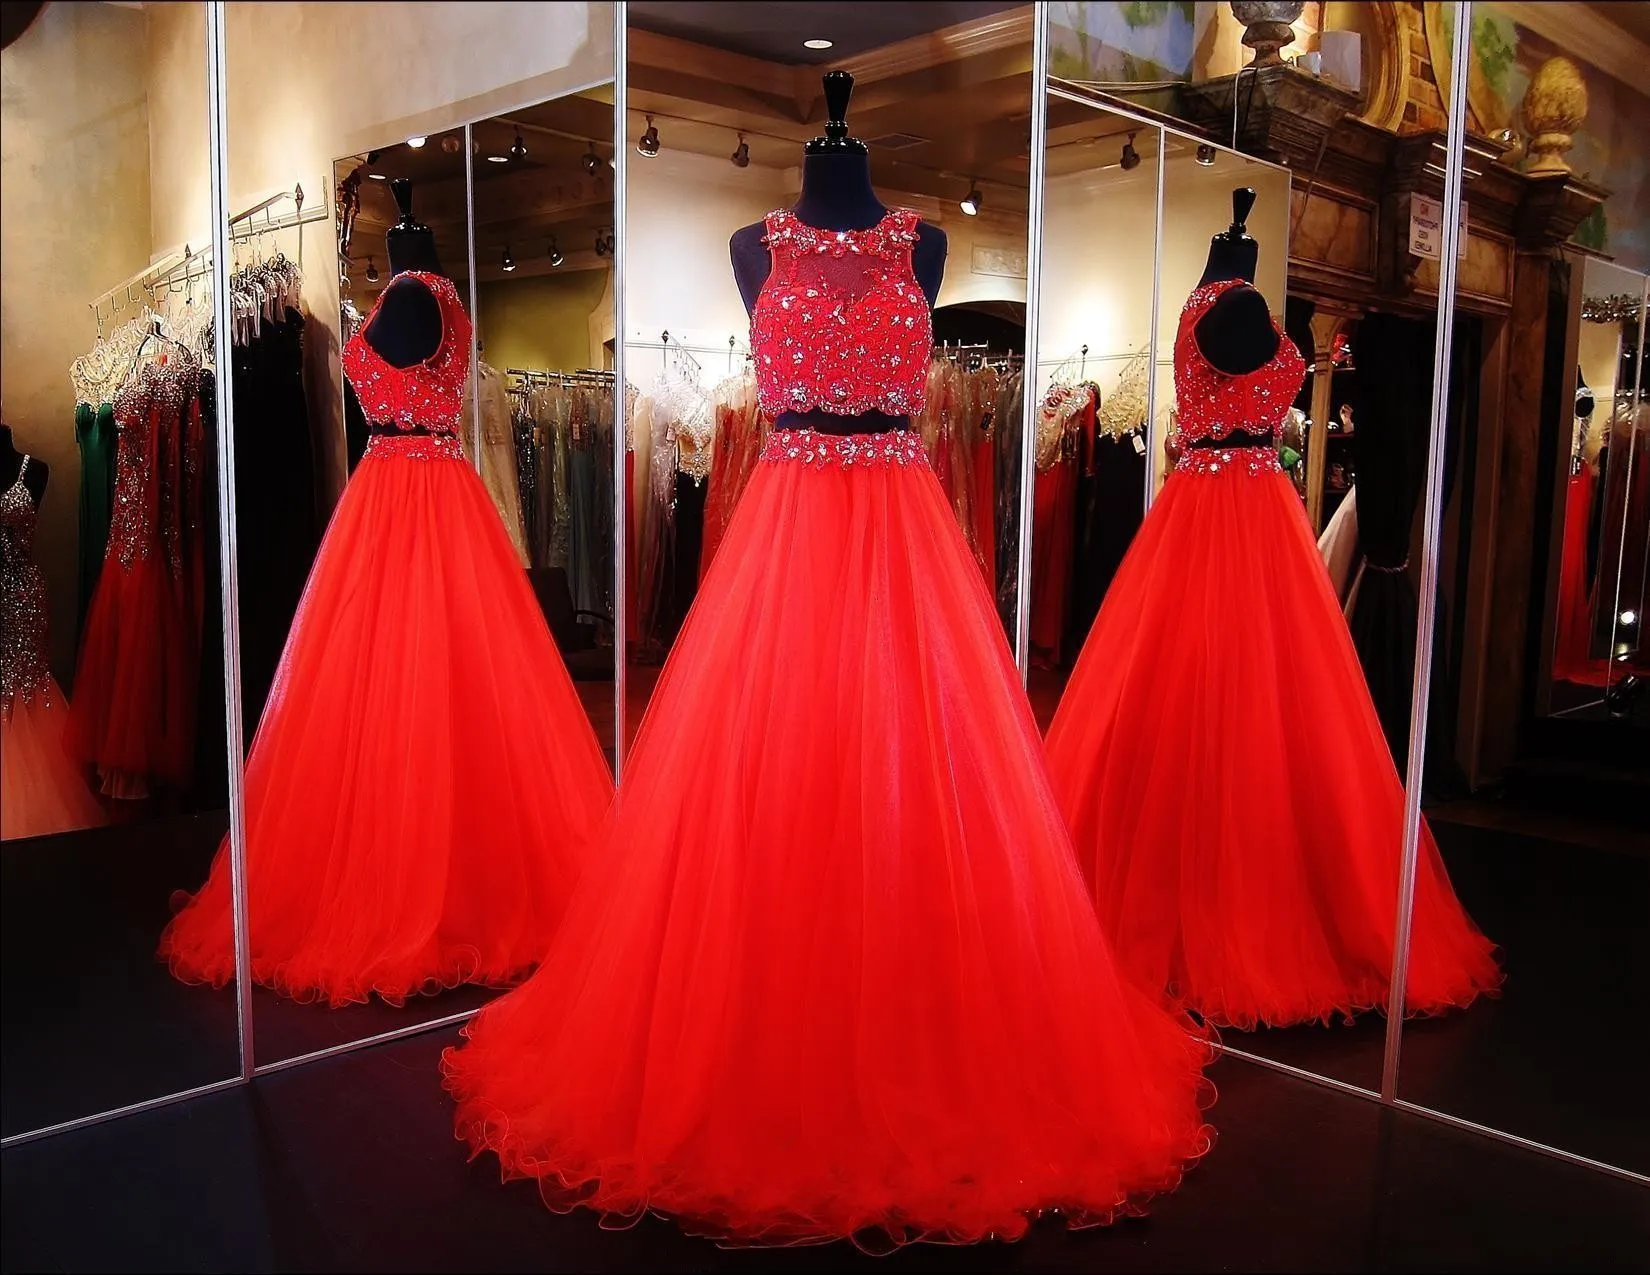 Red Crystals Beaded Two Pieces Prom Dresses 2017 Crew Sleeveless Tulle Long Skirt Black Girl Formal Wear Evening Gowns Cocktail Party Dress